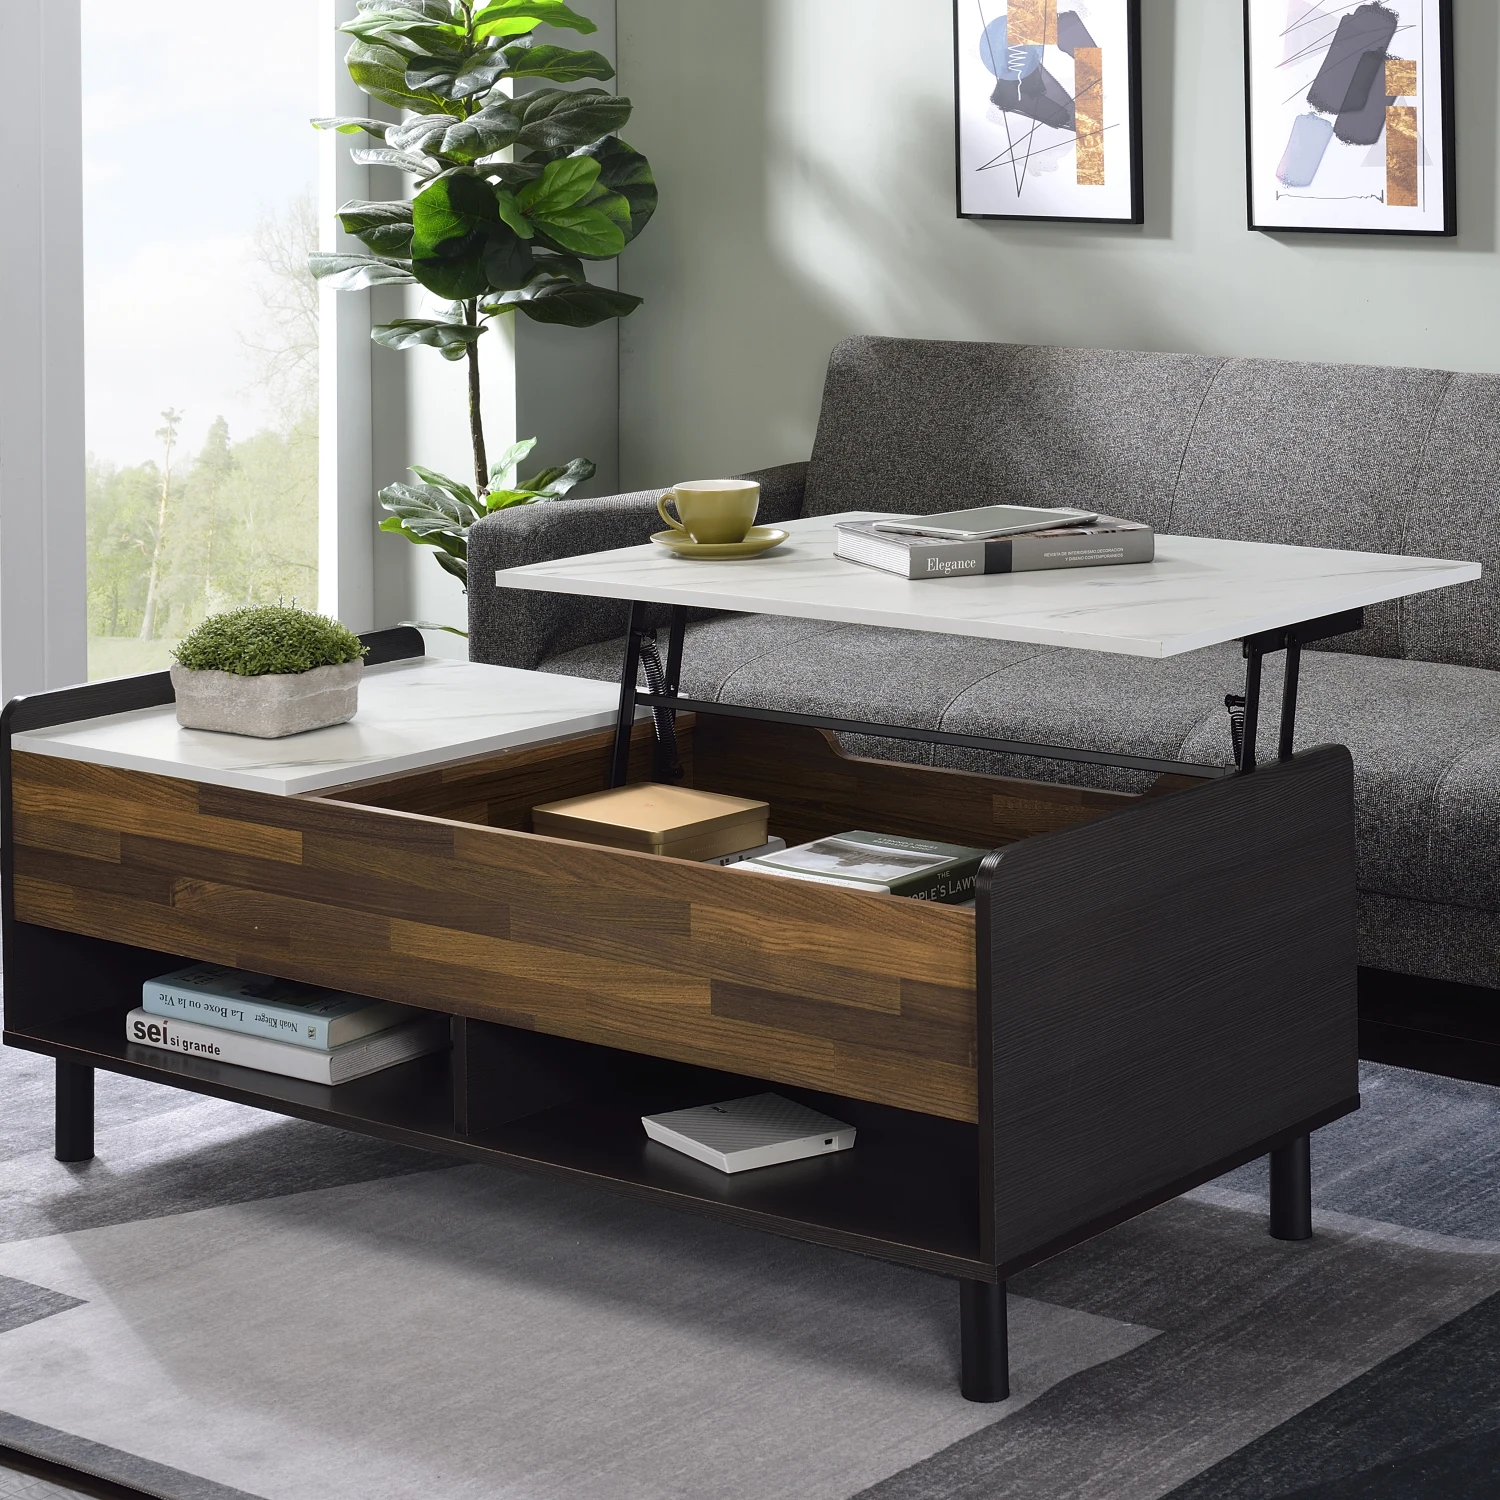 

Elegant ACME Axel Marble Coffee Table with Lift Top and Walnut & Black Finish - LV00828 makeup